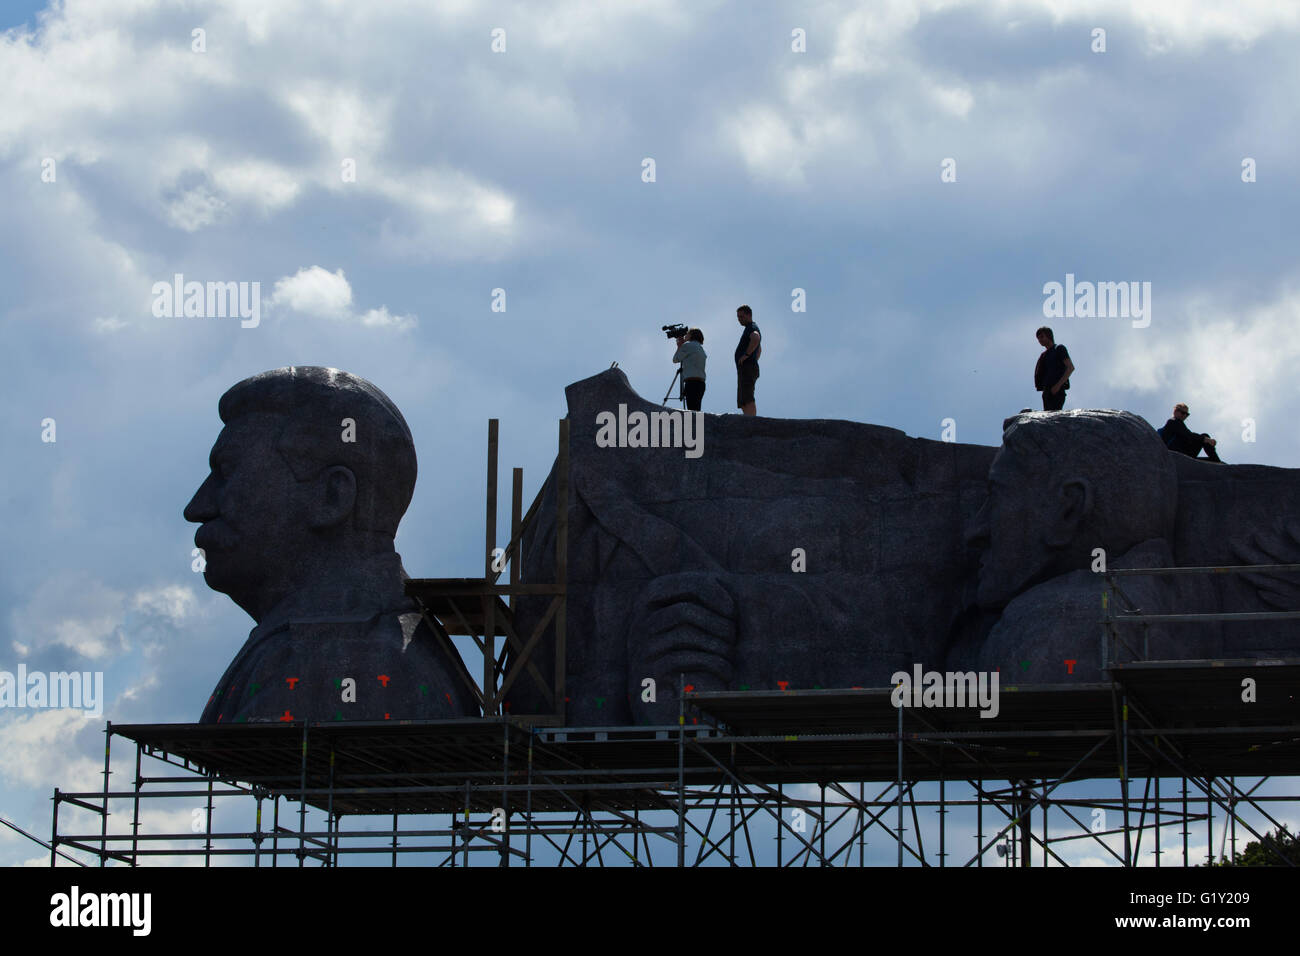 Prague, Czech Republic. 20th May 2016. Huge head of Soviet dictator Joseph Stalin rising over Letna Park in Prague, Czech Republic, during the Czech Television filming the new biopic TV movie Monstrum (The Monster) based on the biography of Czech sculptor Otakar Svec. Stalin returns temporary to the place where the Stalin Monument designed by Otakar Svec stood from 1955 until it was destroyed in 1962. Stock Photo